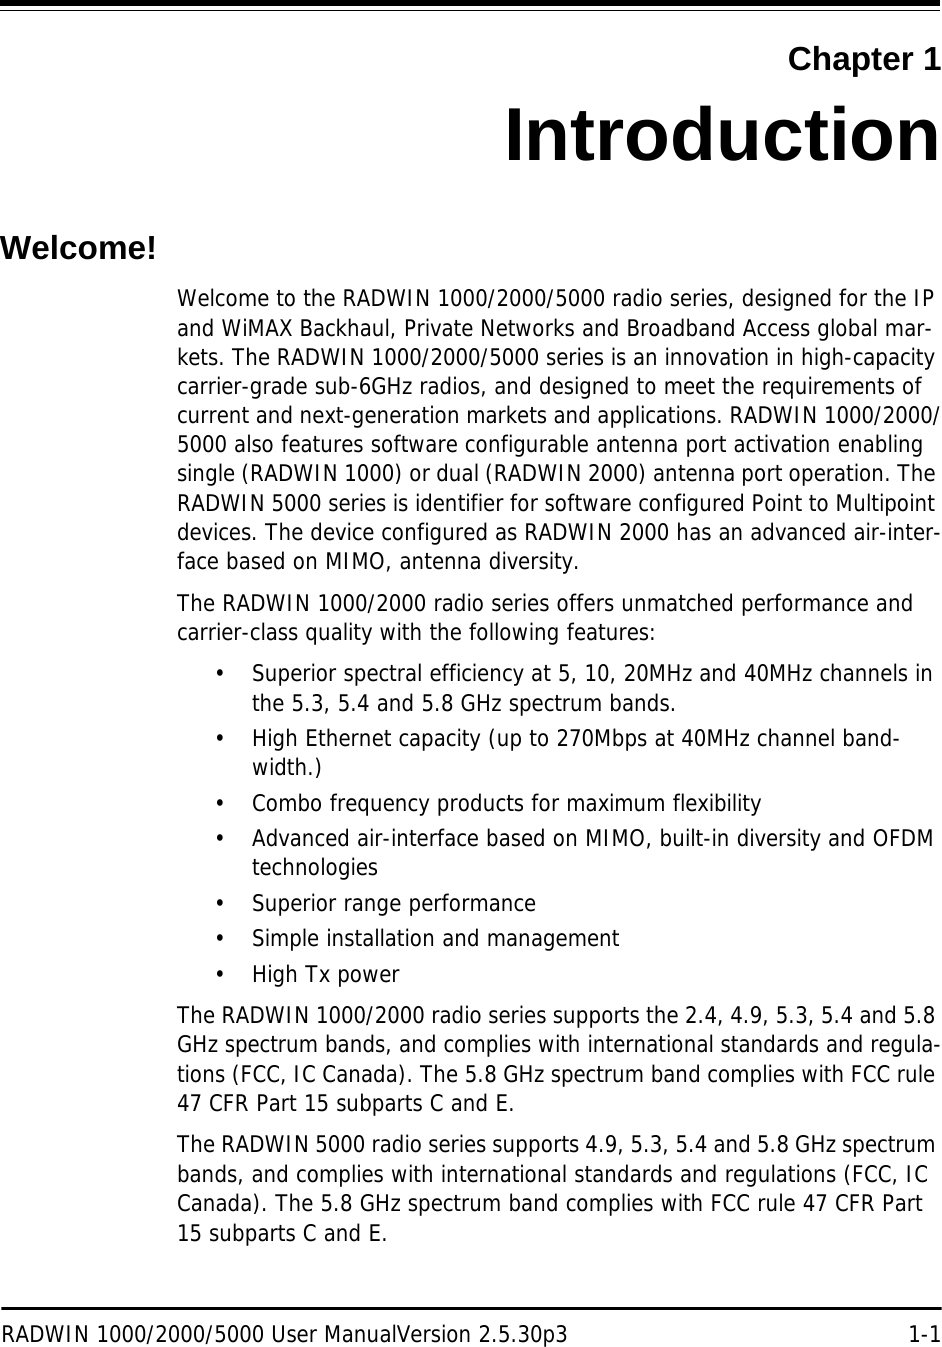 RADWIN 1000/2000/5000 User ManualVersion 2.5.30p3 1-1Chapter 1IntroductionWelcome!Welcome to the RADWIN 1000/2000/5000 radio series, designed for the IP and WiMAX Backhaul, Private Networks and Broadband Access global mar-kets. The RADWIN 1000/2000/5000 series is an innovation in high-capacity carrier-grade sub-6GHz radios, and designed to meet the requirements of current and next-generation markets and applications. RADWIN 1000/2000/5000 also features software configurable antenna port activation enabling single (RADWIN 1000) or dual (RADWIN 2000) antenna port operation. The RADWIN 5000 series is identifier for software configured Point to Multipoint devices. The device configured as RADWIN 2000 has an advanced air-inter-face based on MIMO, antenna diversity.The RADWIN 1000/2000 radio series offers unmatched performance and carrier-class quality with the following features:• Superior spectral efficiency at 5, 10, 20MHz and 40MHz channels in the 5.3, 5.4 and 5.8 GHz spectrum bands.• High Ethernet capacity (up to 270Mbps at 40MHz channel band-width.)• Combo frequency products for maximum flexibility • Advanced air-interface based on MIMO, built-in diversity and OFDM technologies• Superior range performance• Simple installation and management• High Tx powerThe RADWIN 1000/2000 radio series supports the 2.4, 4.9, 5.3, 5.4 and 5.8 GHz spectrum bands, and complies with international standards and regula-tions (FCC, IC Canada). The 5.8 GHz spectrum band complies with FCC rule 47 CFR Part 15 subparts C and E.The RADWIN 5000 radio series supports 4.9, 5.3, 5.4 and 5.8 GHz spectrum bands, and complies with international standards and regulations (FCC, IC Canada). The 5.8 GHz spectrum band complies with FCC rule 47 CFR Part 15 subparts C and E.